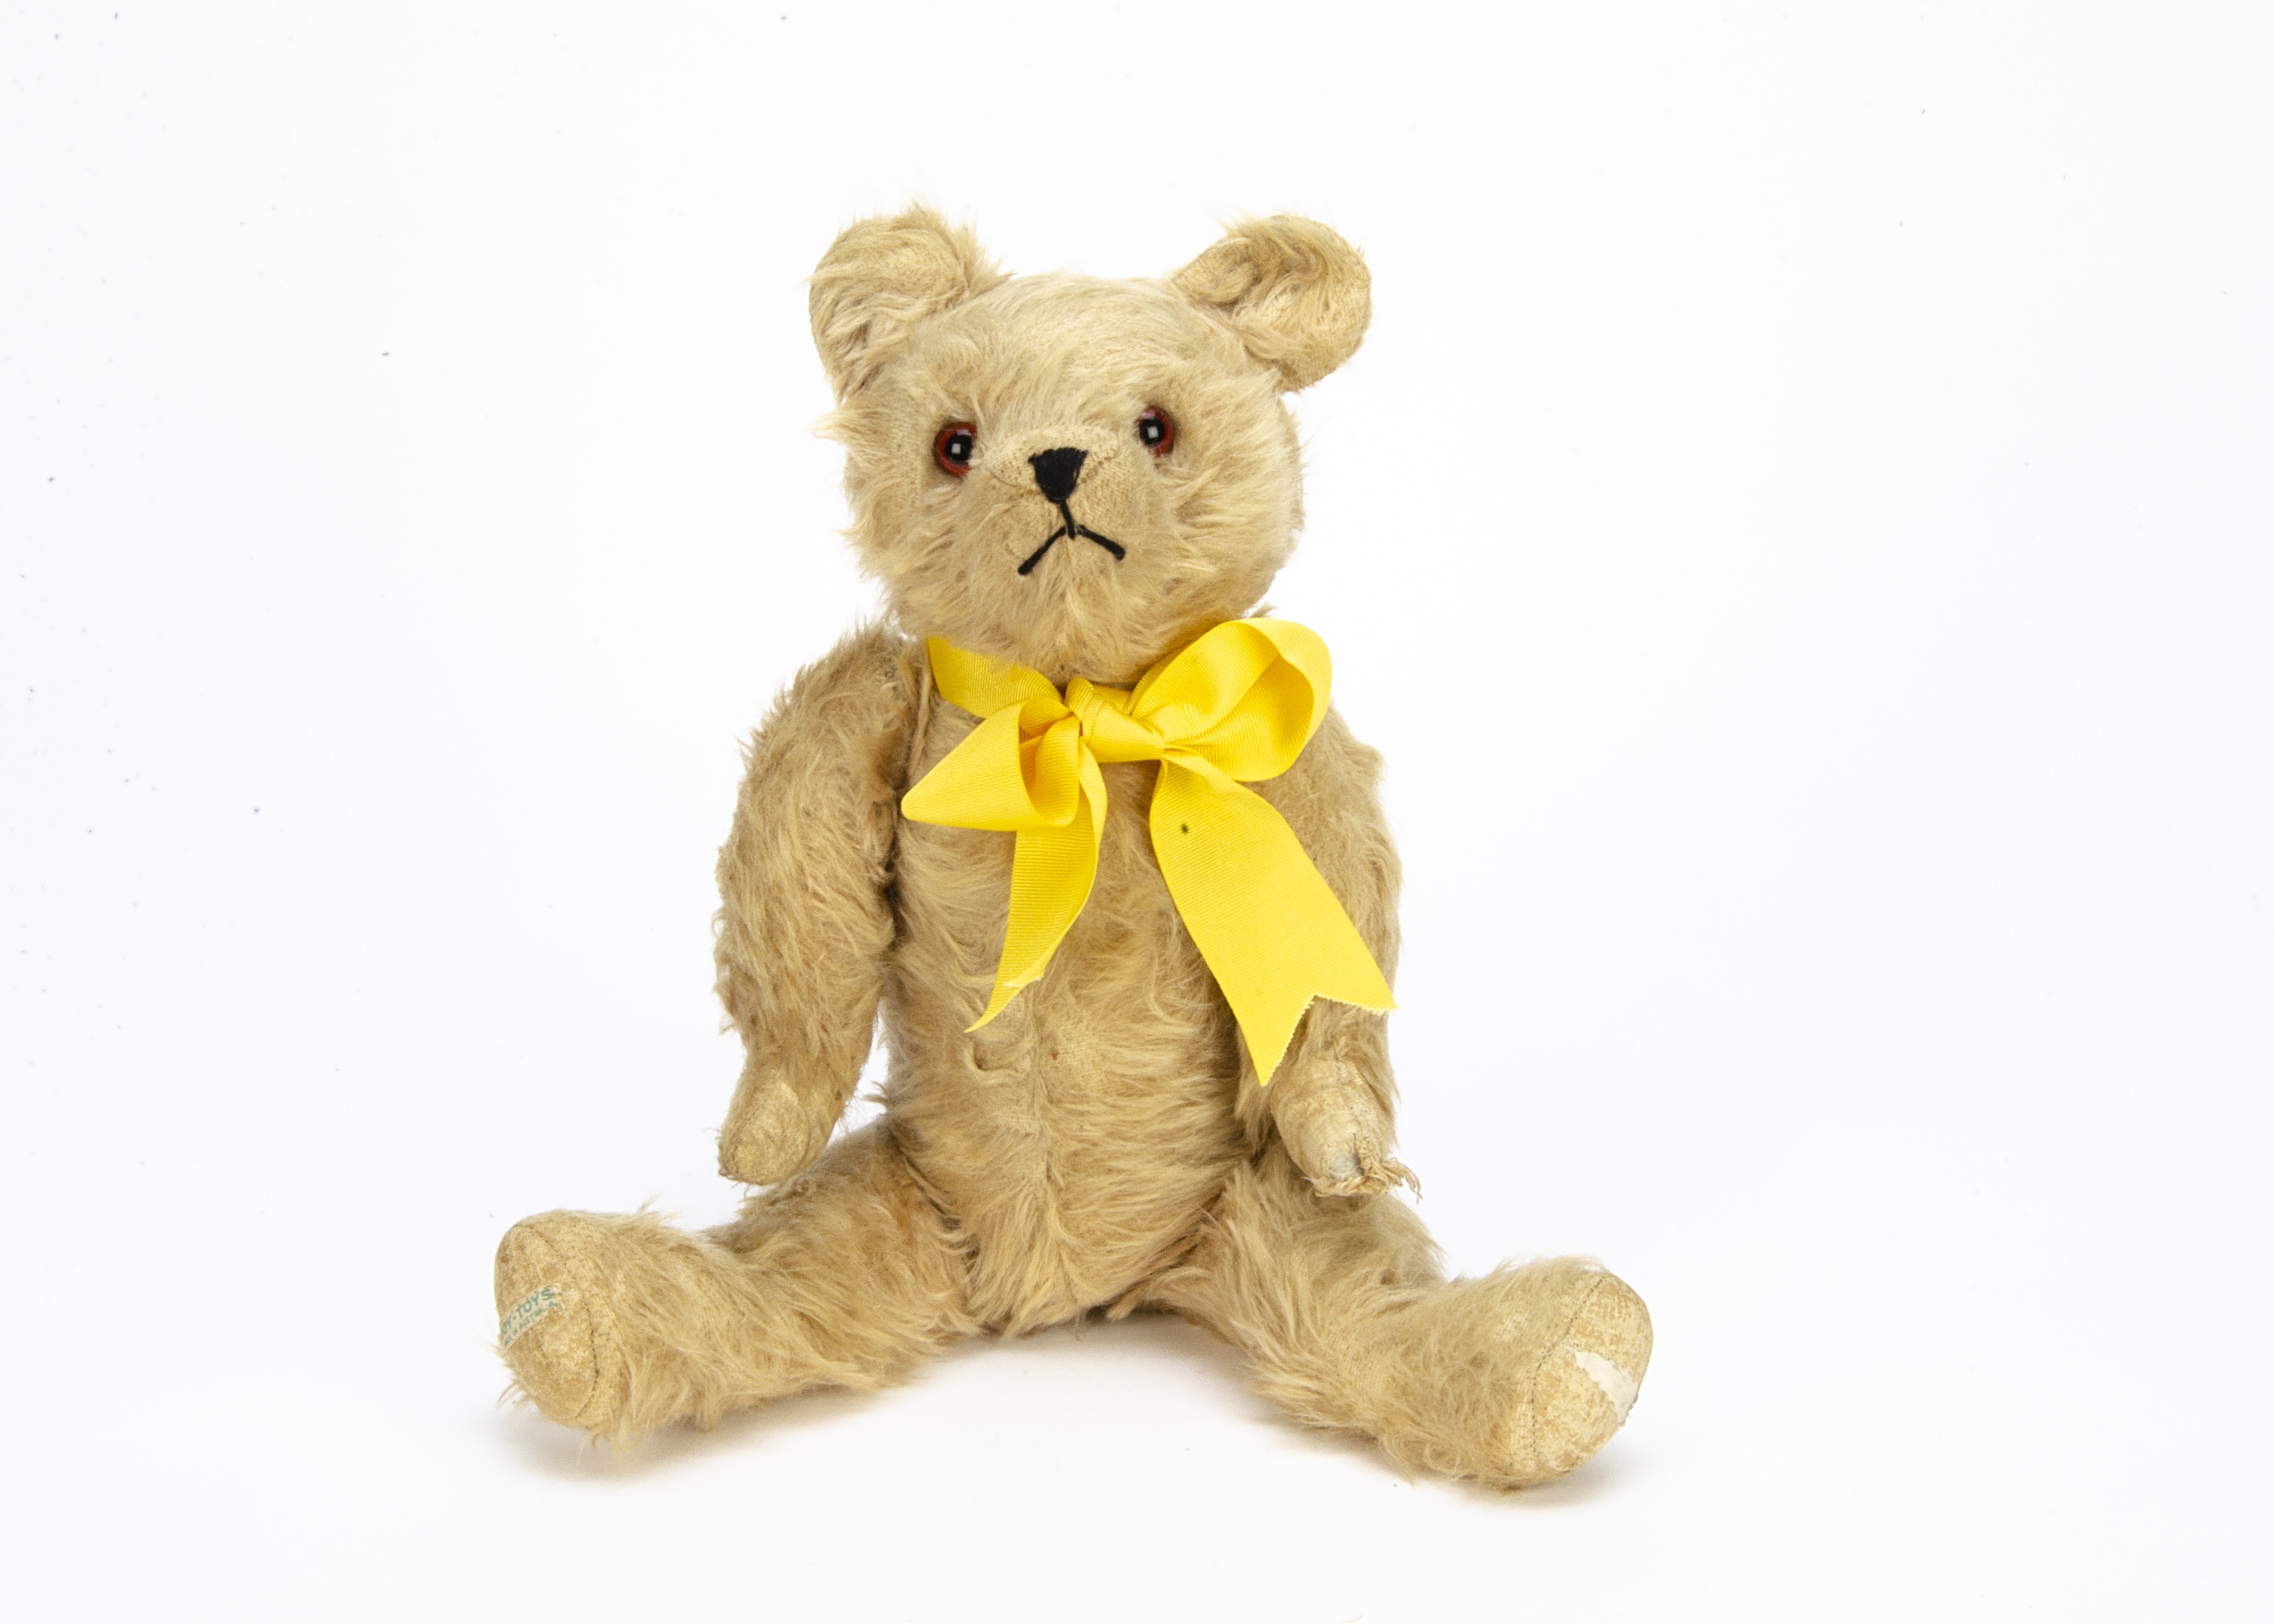 Larry a Joy Toys (Australia) teddy bear 1940s, with beige mohair, orange and black glass eyes, - Image 2 of 2